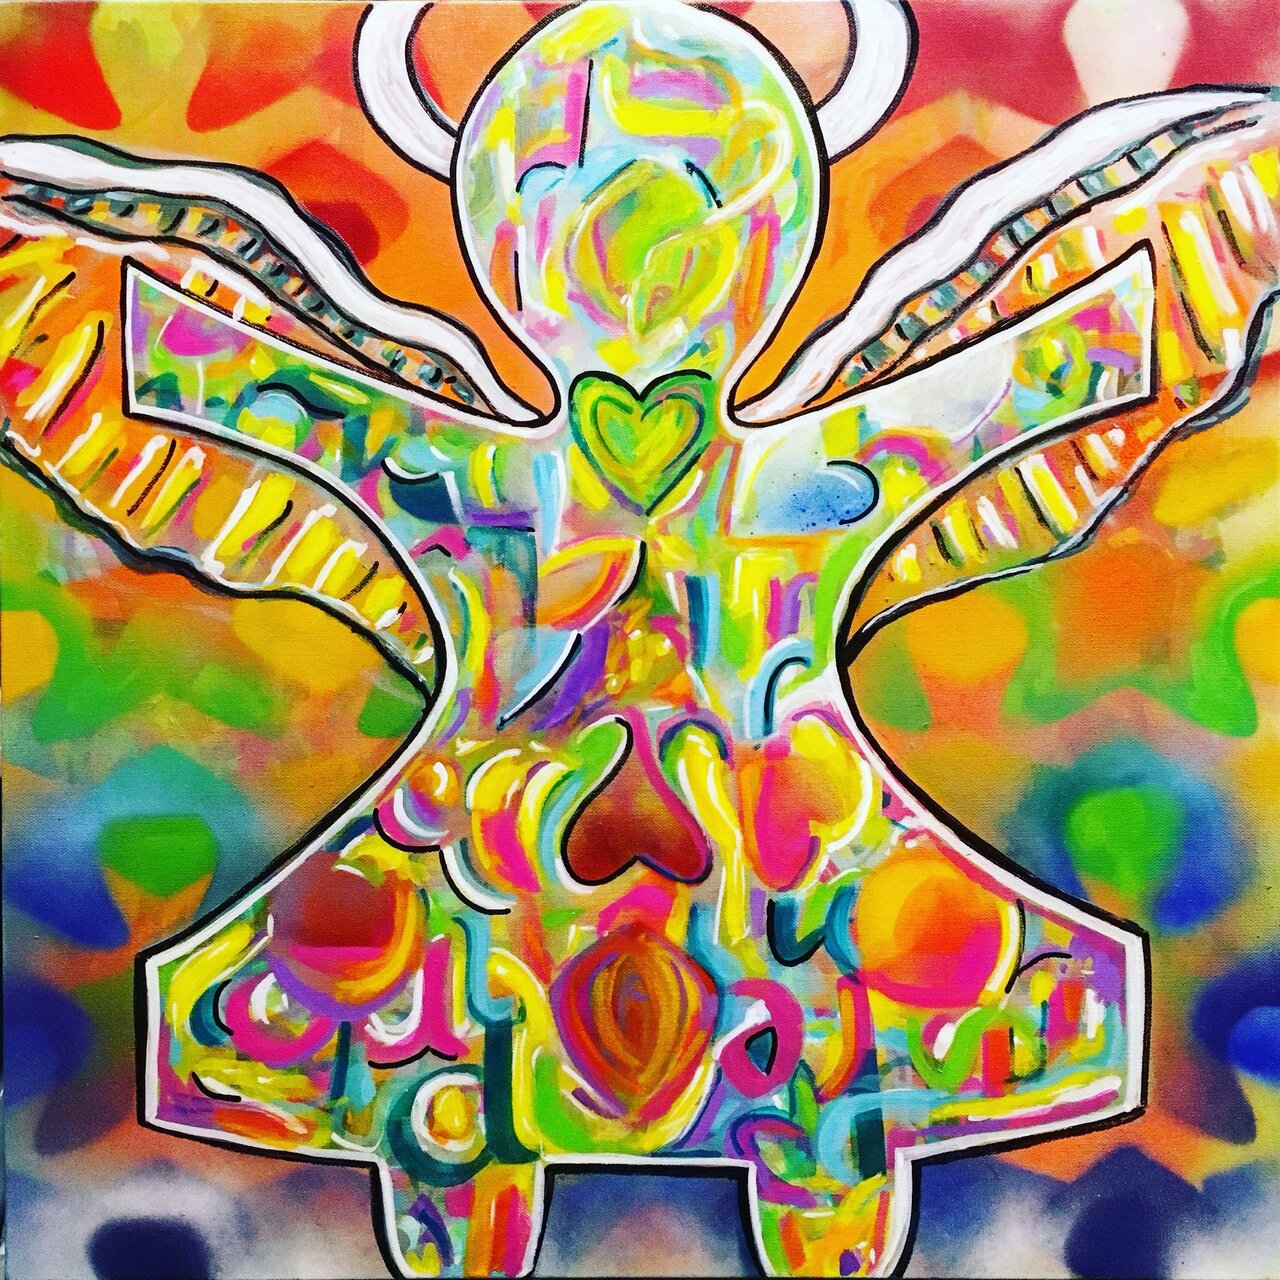 Today’s work in progress...”You say I haven’t earned my wings yet. Perhaps you just haven’t seen me fly?”, 20x20”, spray paint and marker on canvas.  #art #angel #paperdolls #painting #contemporaryart #spraypaintart #graffiti #rainbow #love https://t.co/R8WDSvaGyn